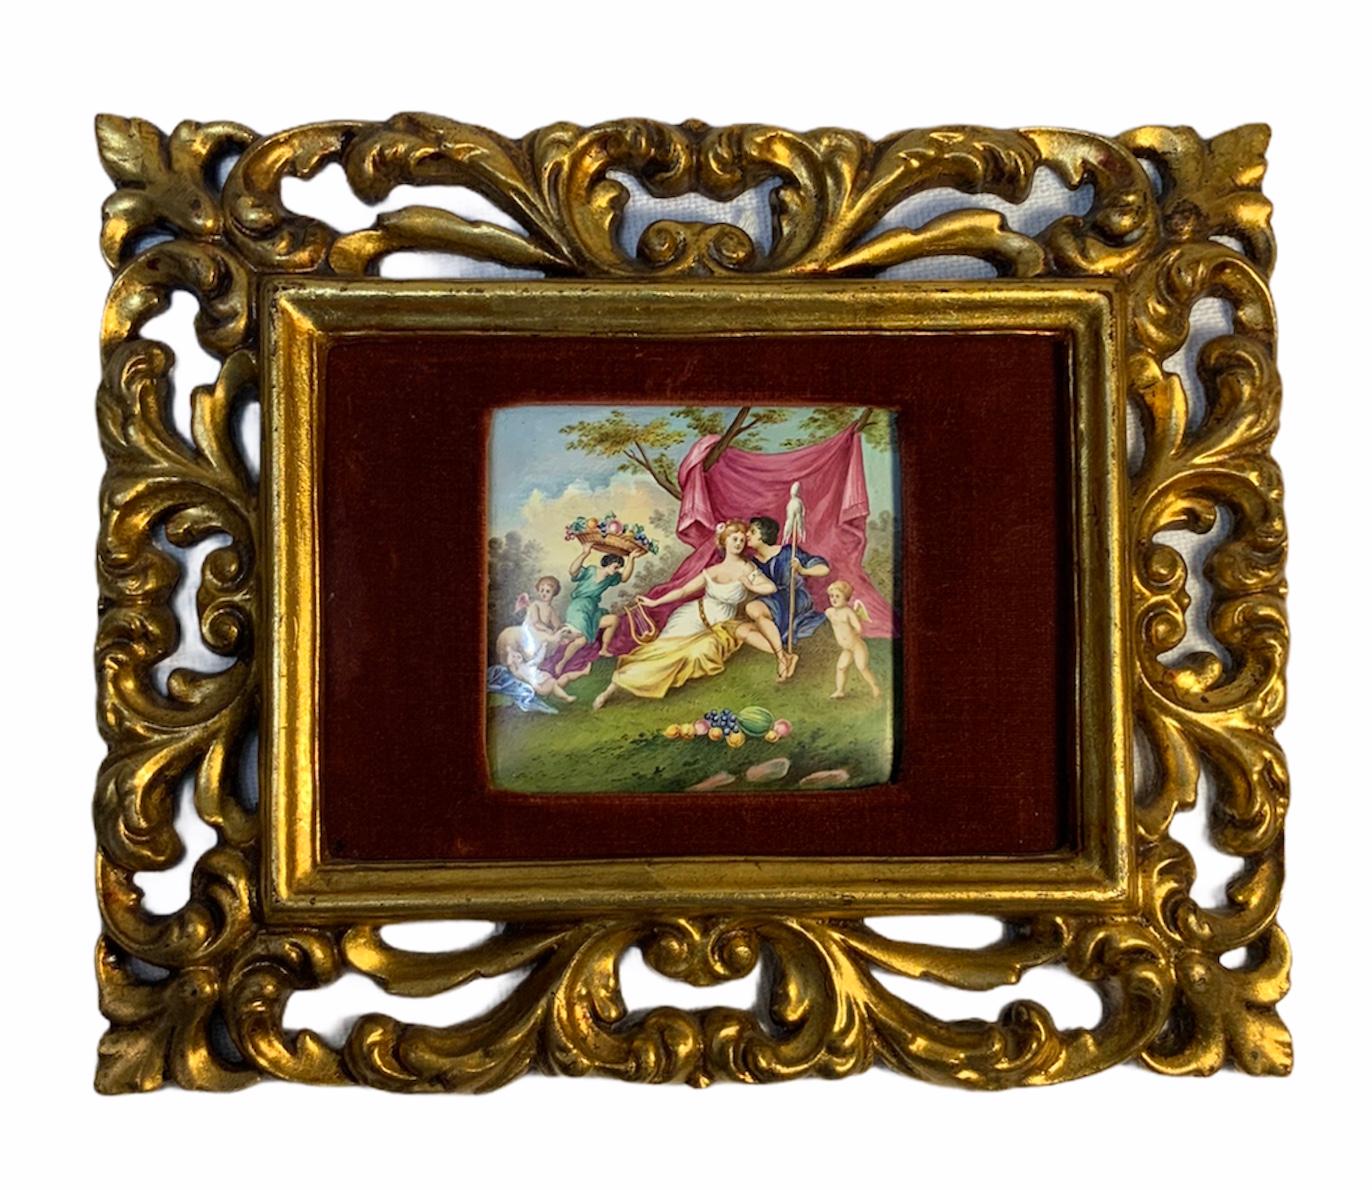 Rococo Revival KPM Style Hand Painted Medieval Time Scene Plaque For Sale